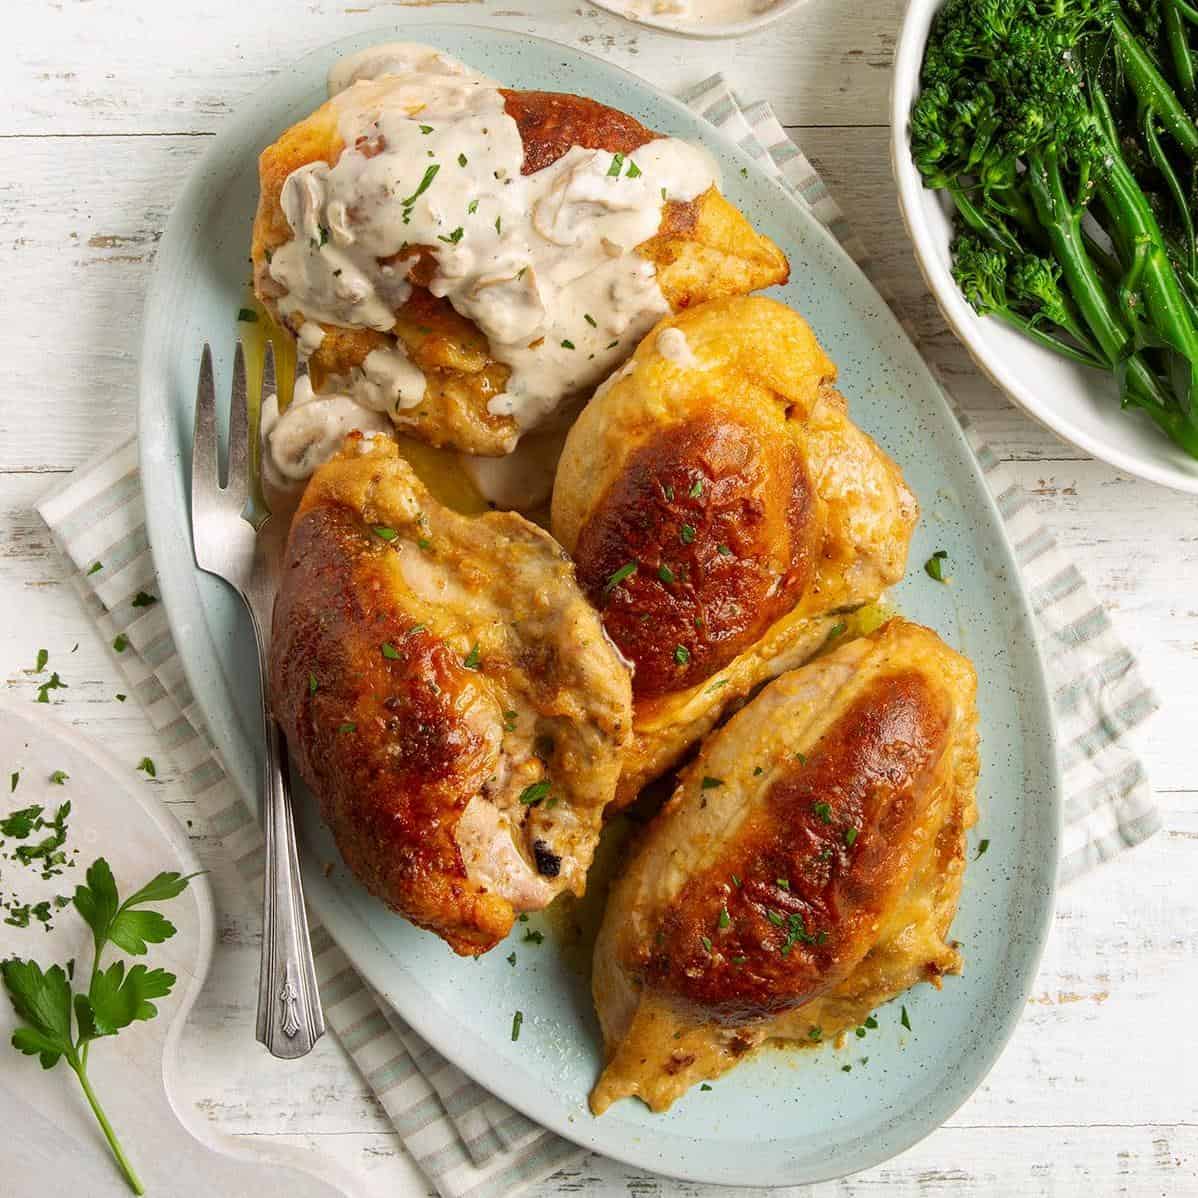  Sizzling hot off the grill - this Chicken Royale is fit for a king!